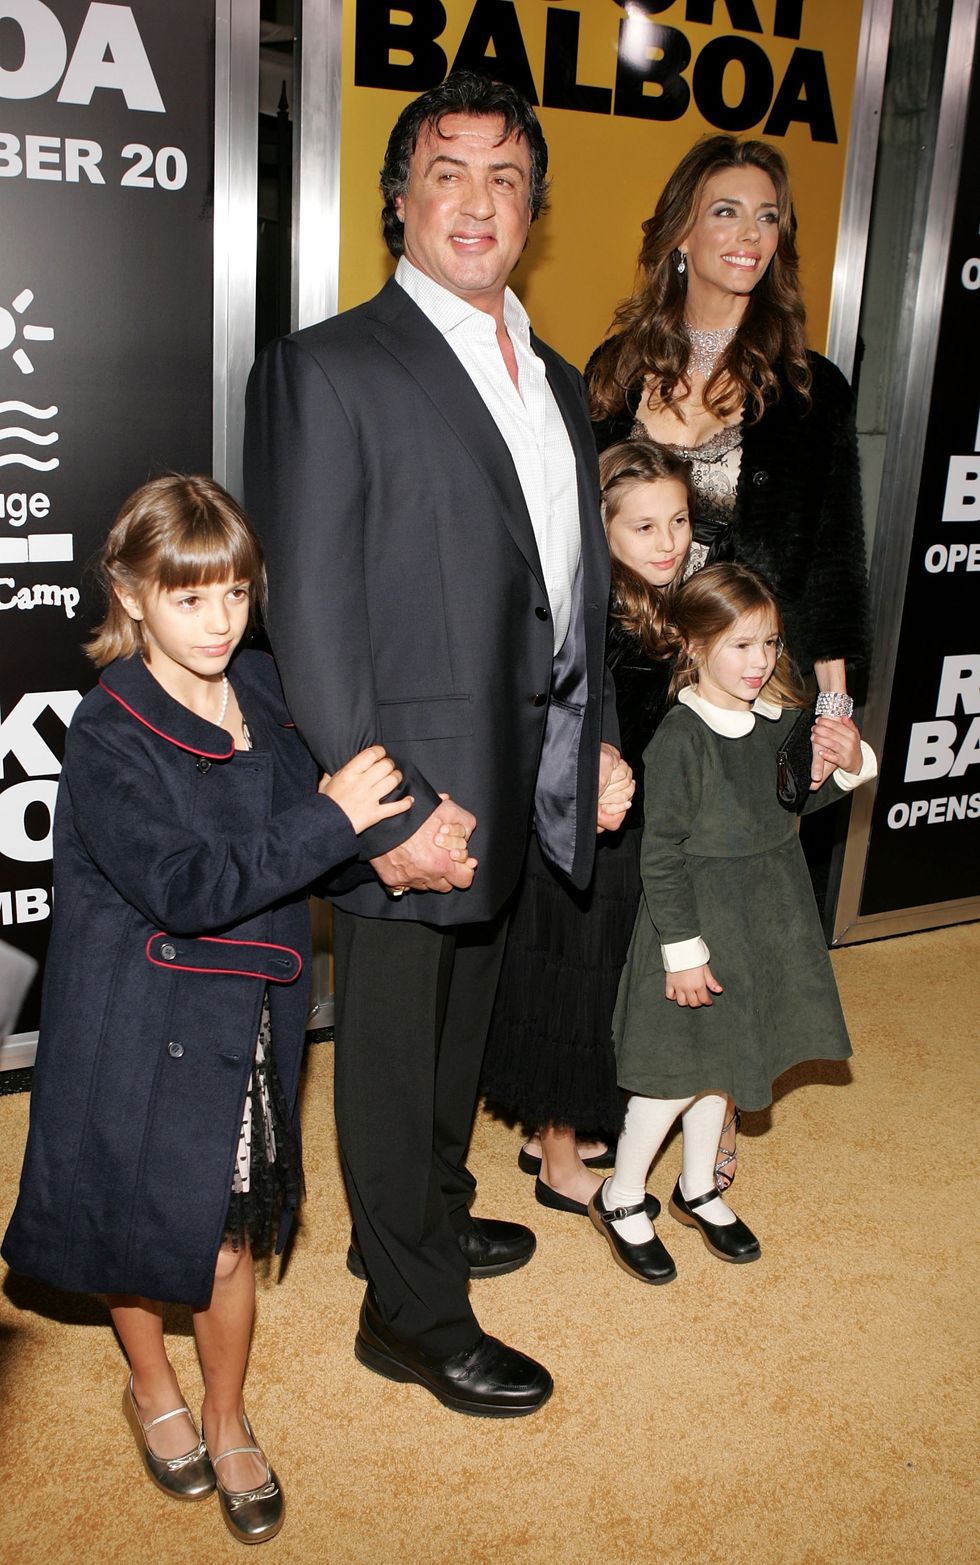 premiere of mgm's "rocky balboa" arrivals